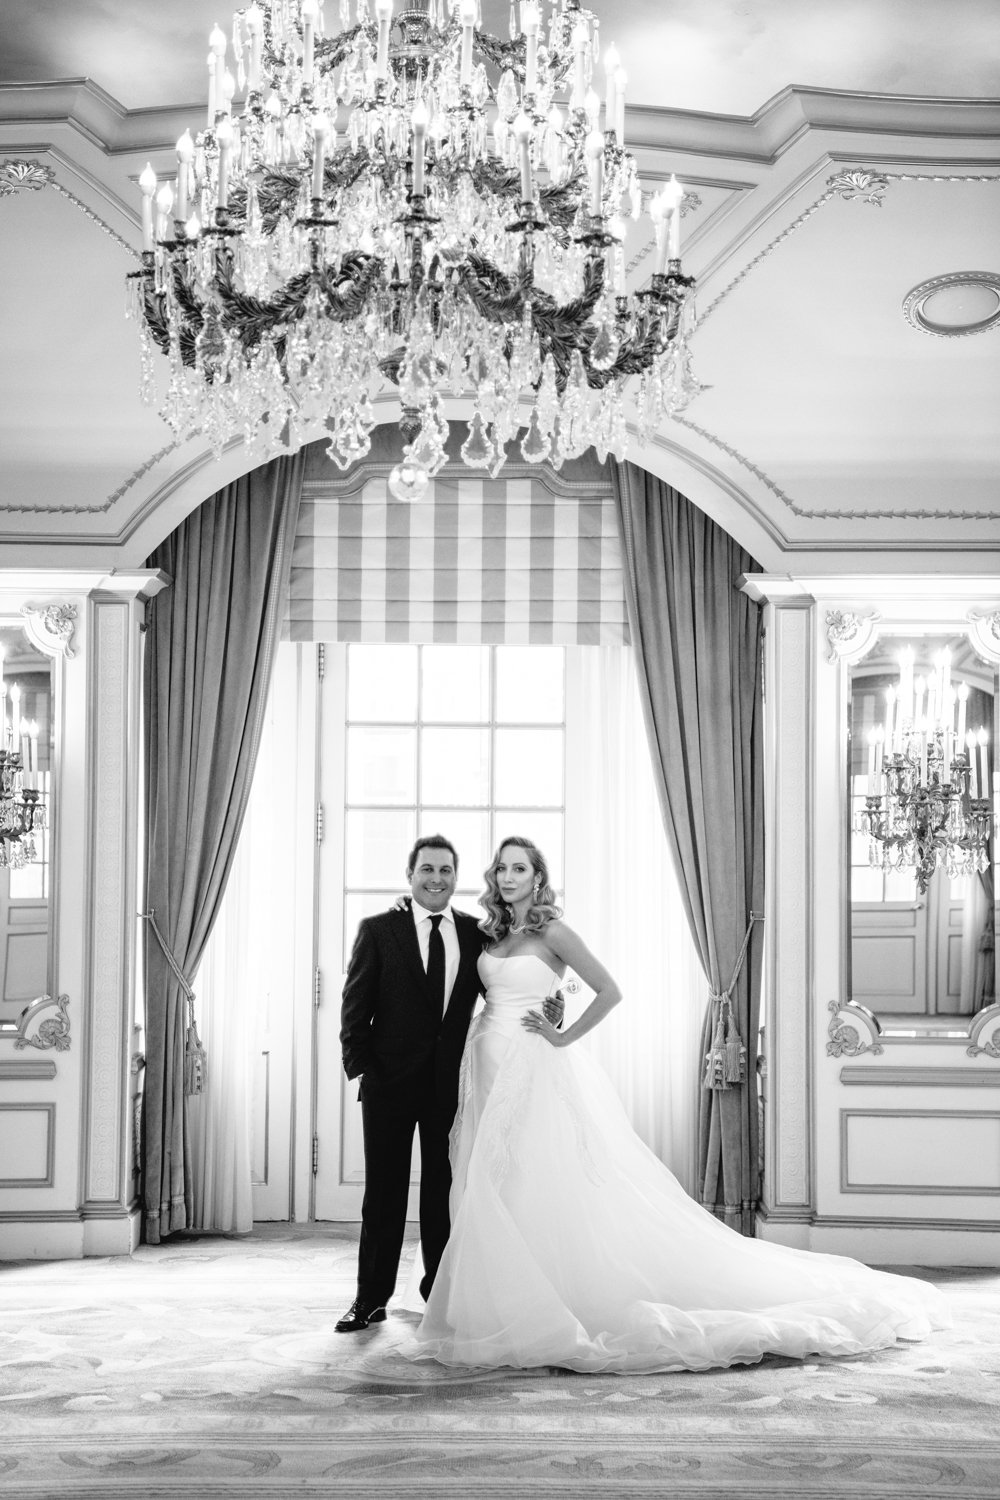 Bride and groom stand below a grand chandelier in the St. Regis in Manhattan. They have an arm around each other and are both smiling at the camera.

Manhattan Luxury Wedding. New York Luxury Wedding Photographer. Wedding in Manhattan. NYC Luxury Wedding.